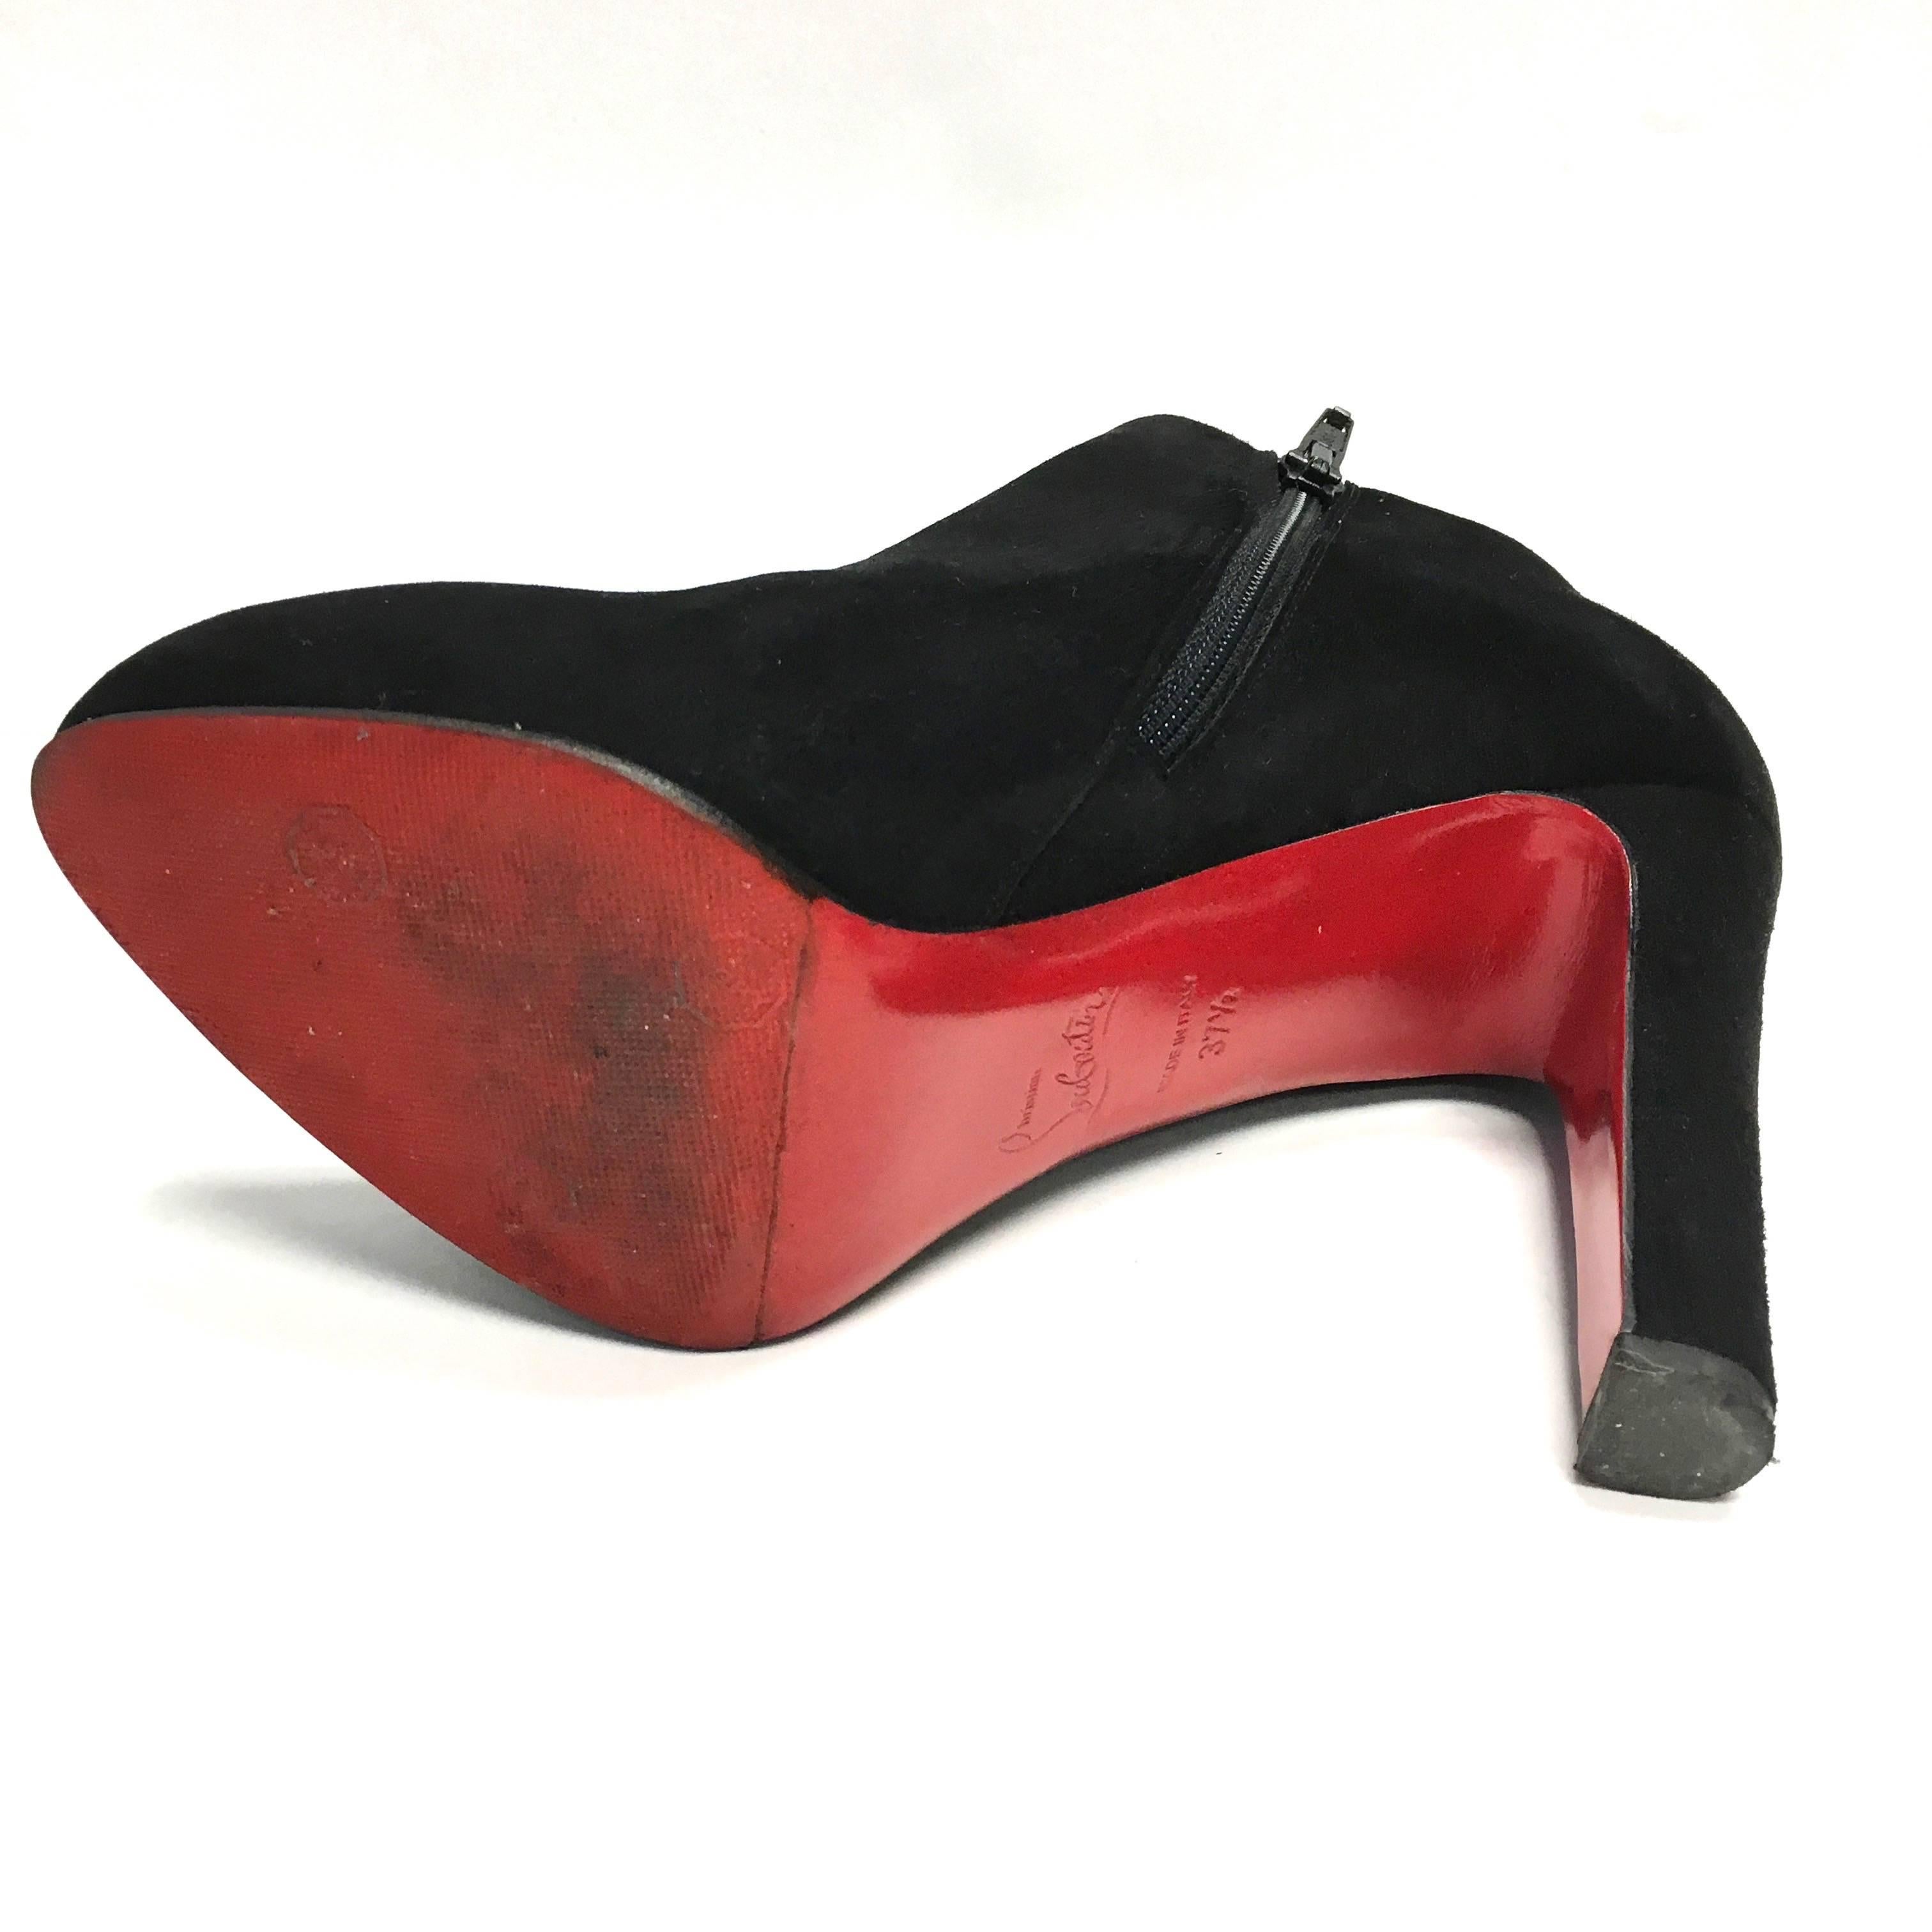 CHRISTIAN LOUBOUTIN Vicky Booty 120 Black Suede Red Bottom Ankle Boots 37.5  In Excellent Condition For Sale In Westlake Village, CA